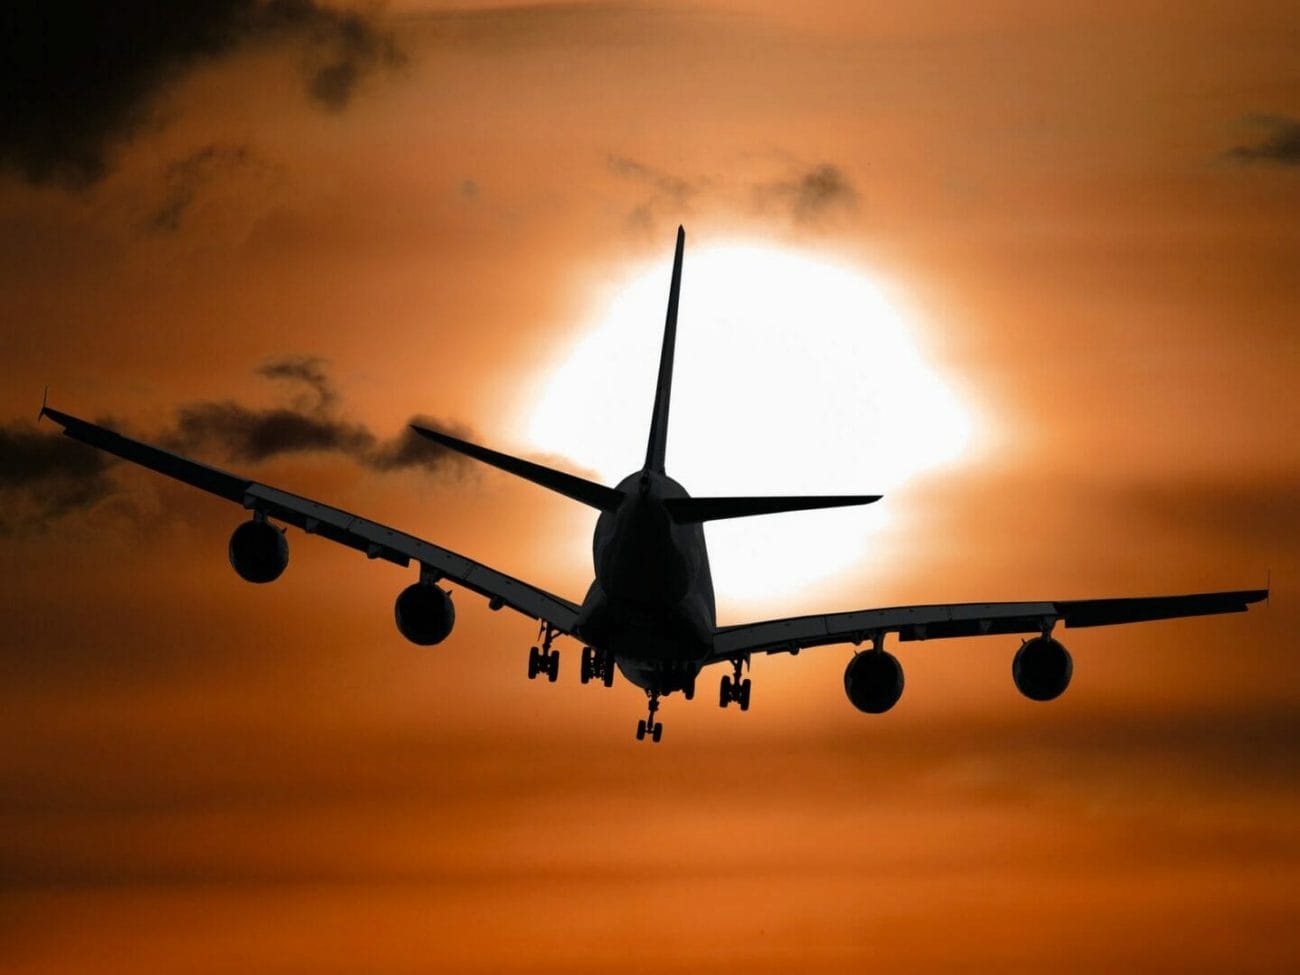 shadow image of a plane flying during sunset - Book Cheap Flights for Europe 